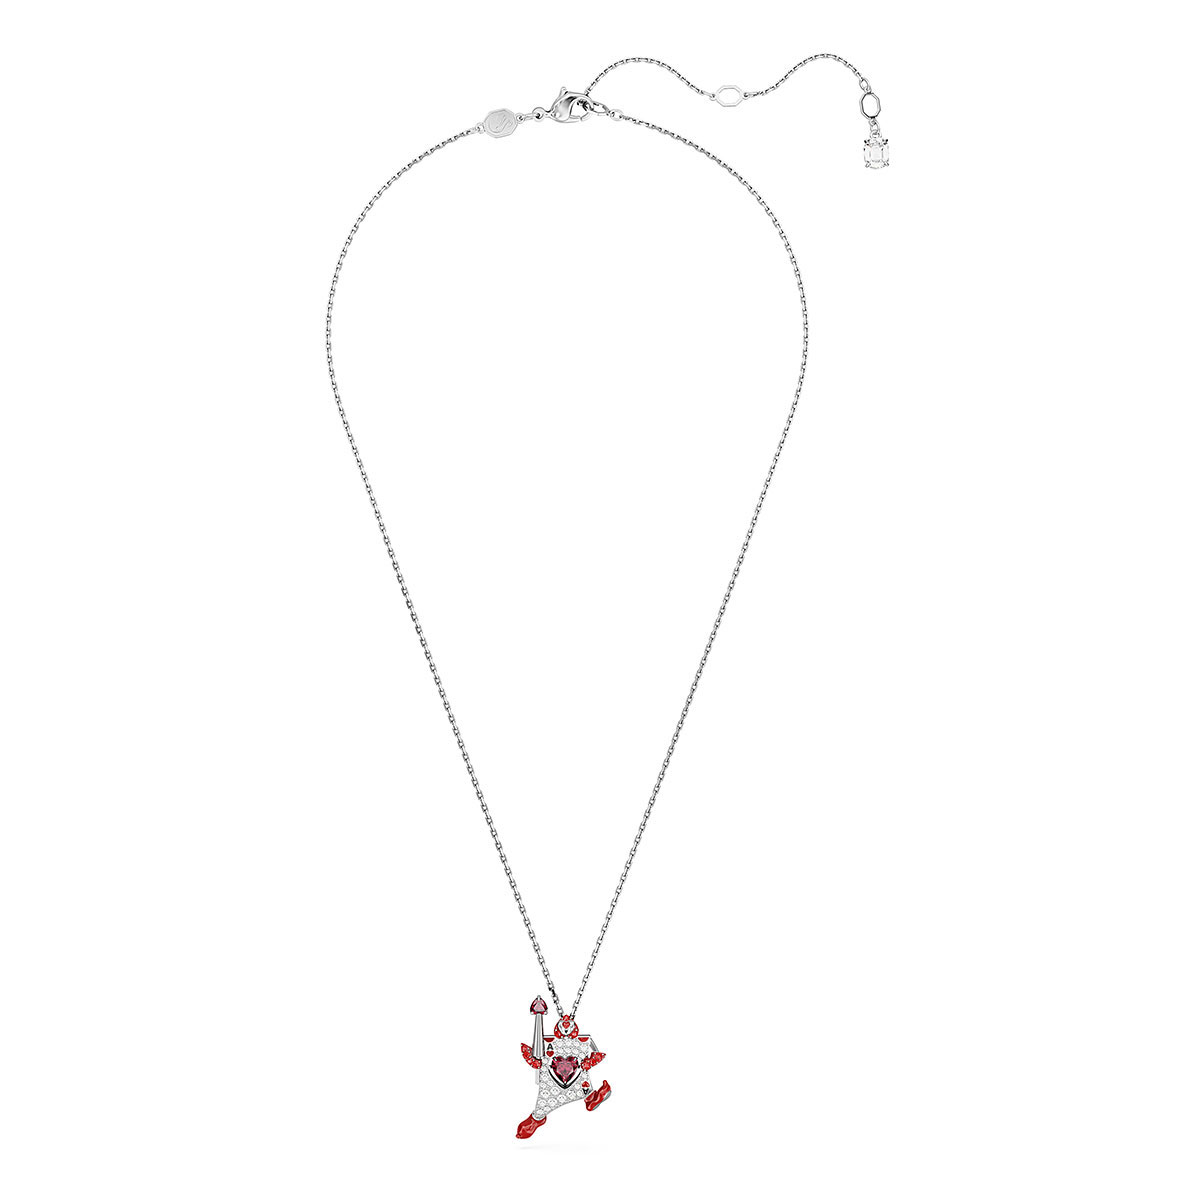 Swarovski Alice in Wonderland Red and Rhodium Playing Card Pendant Necklace